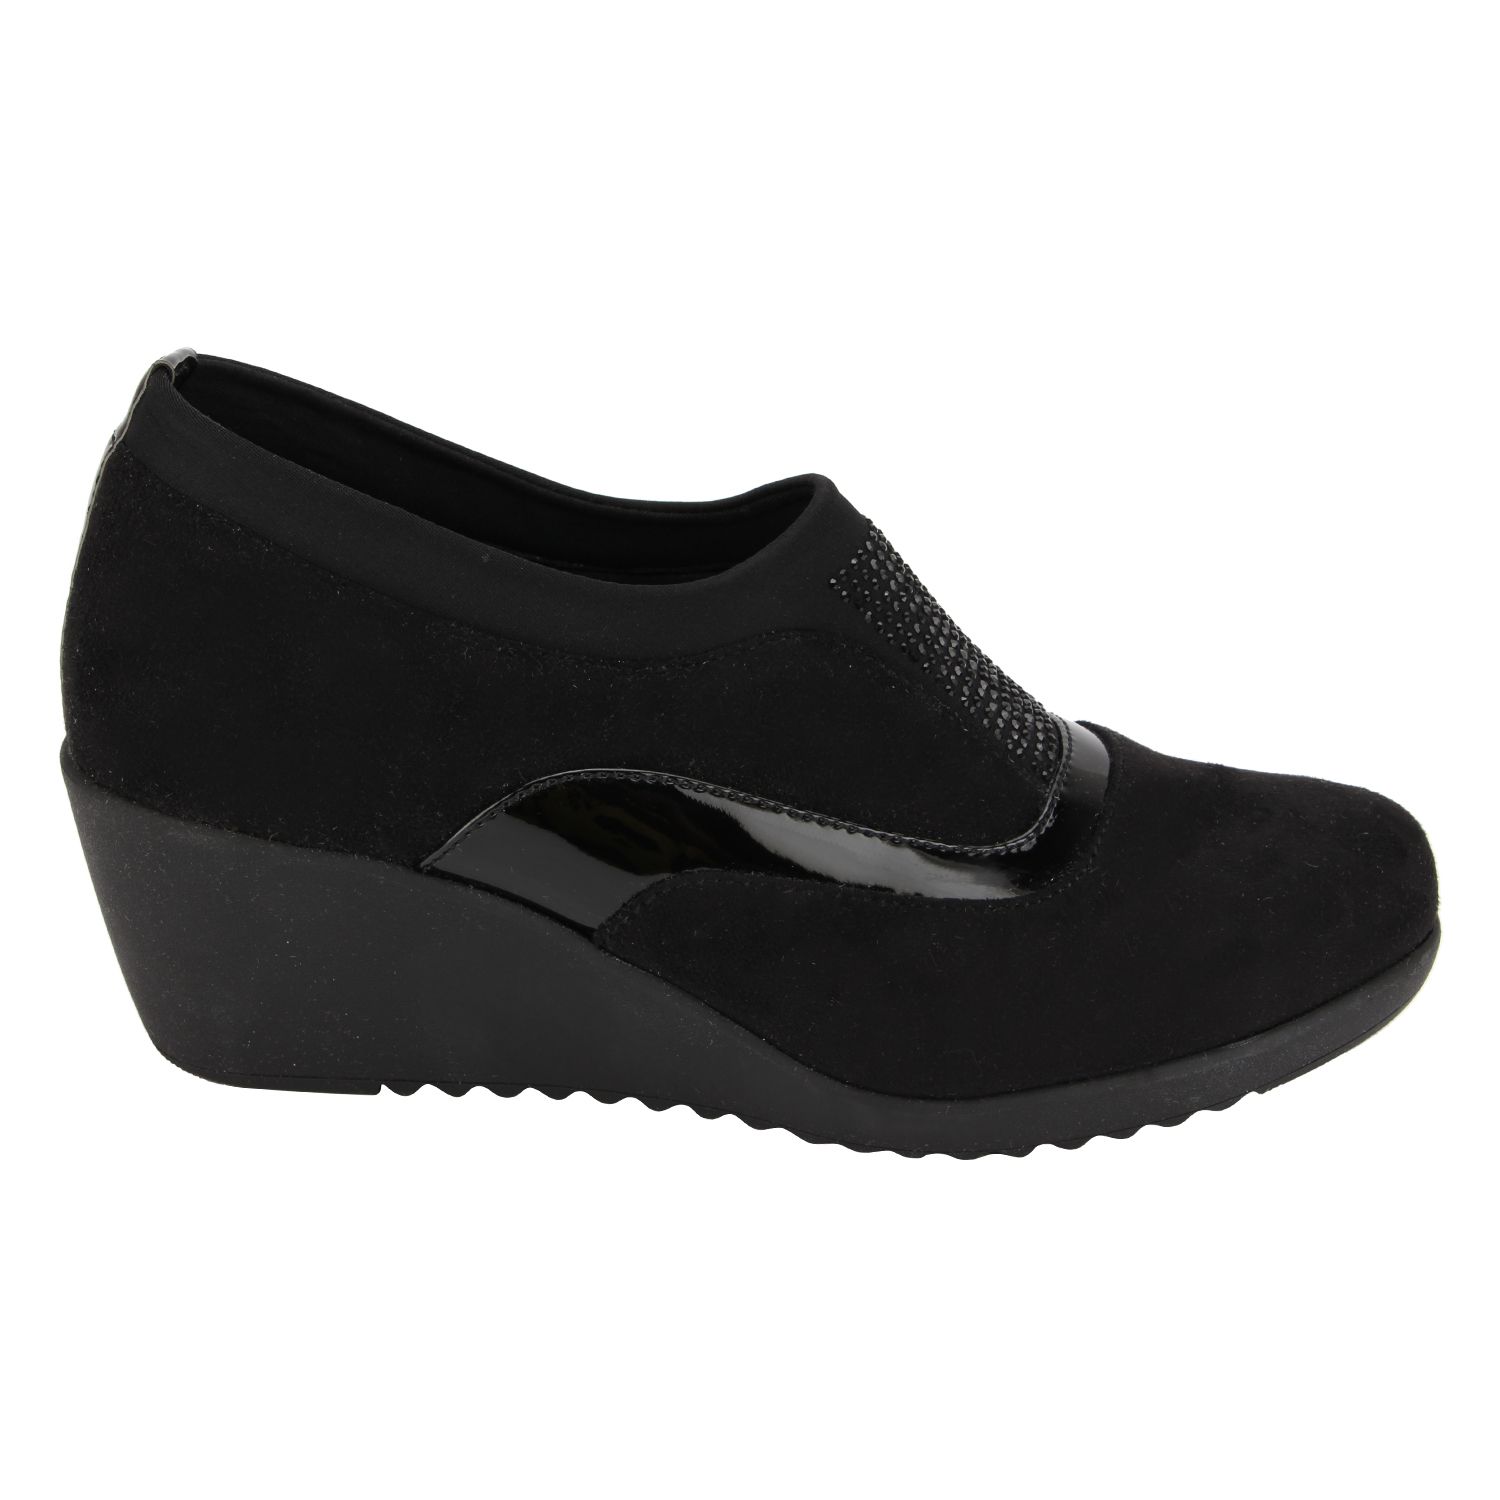 Catwalk Black Lifestyle Casual Shoes Price in India- Buy Catwalk Black ...